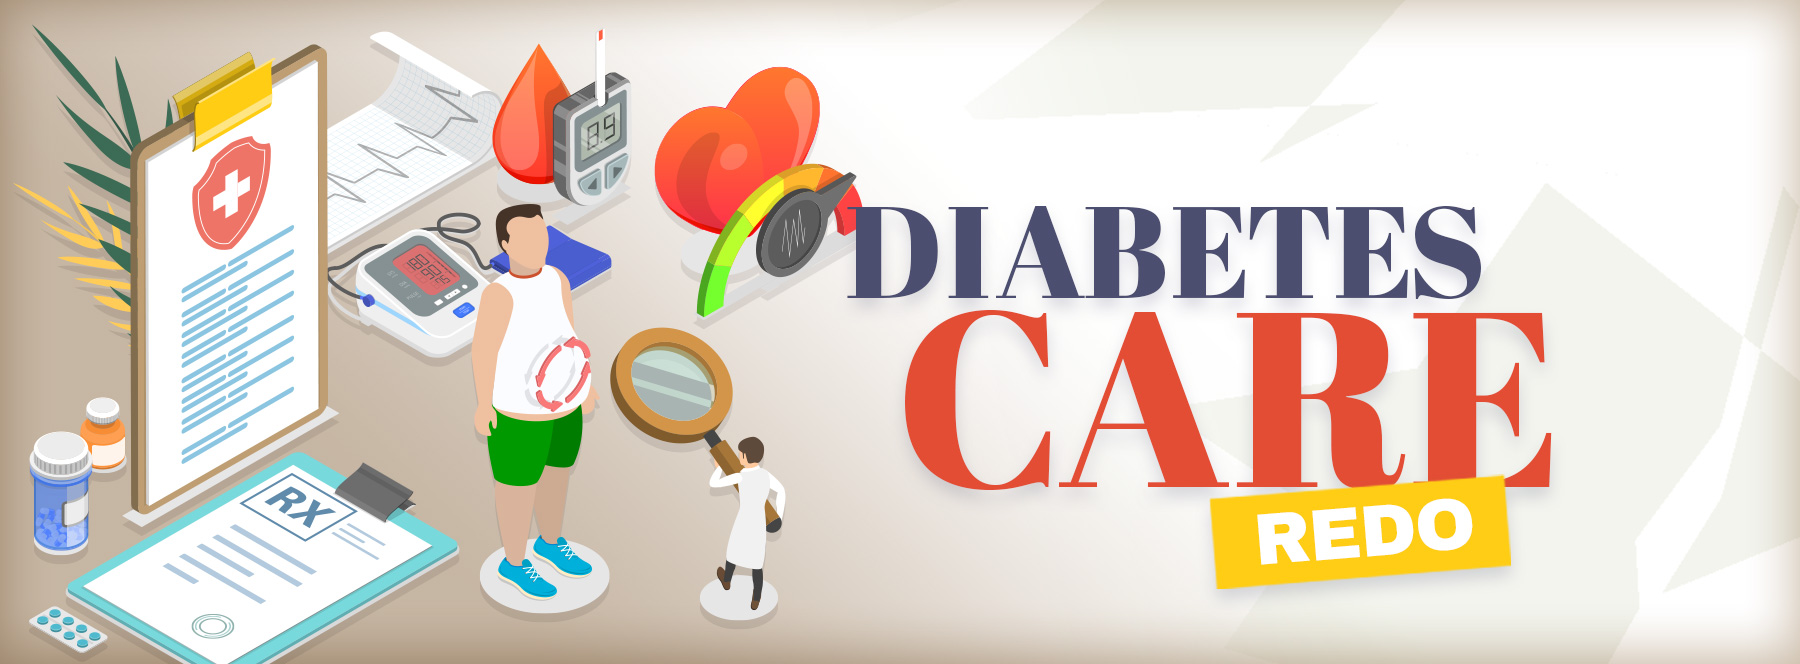 Illustration of Diabetes maintenance, blood pressure, glucose monitoring and weight